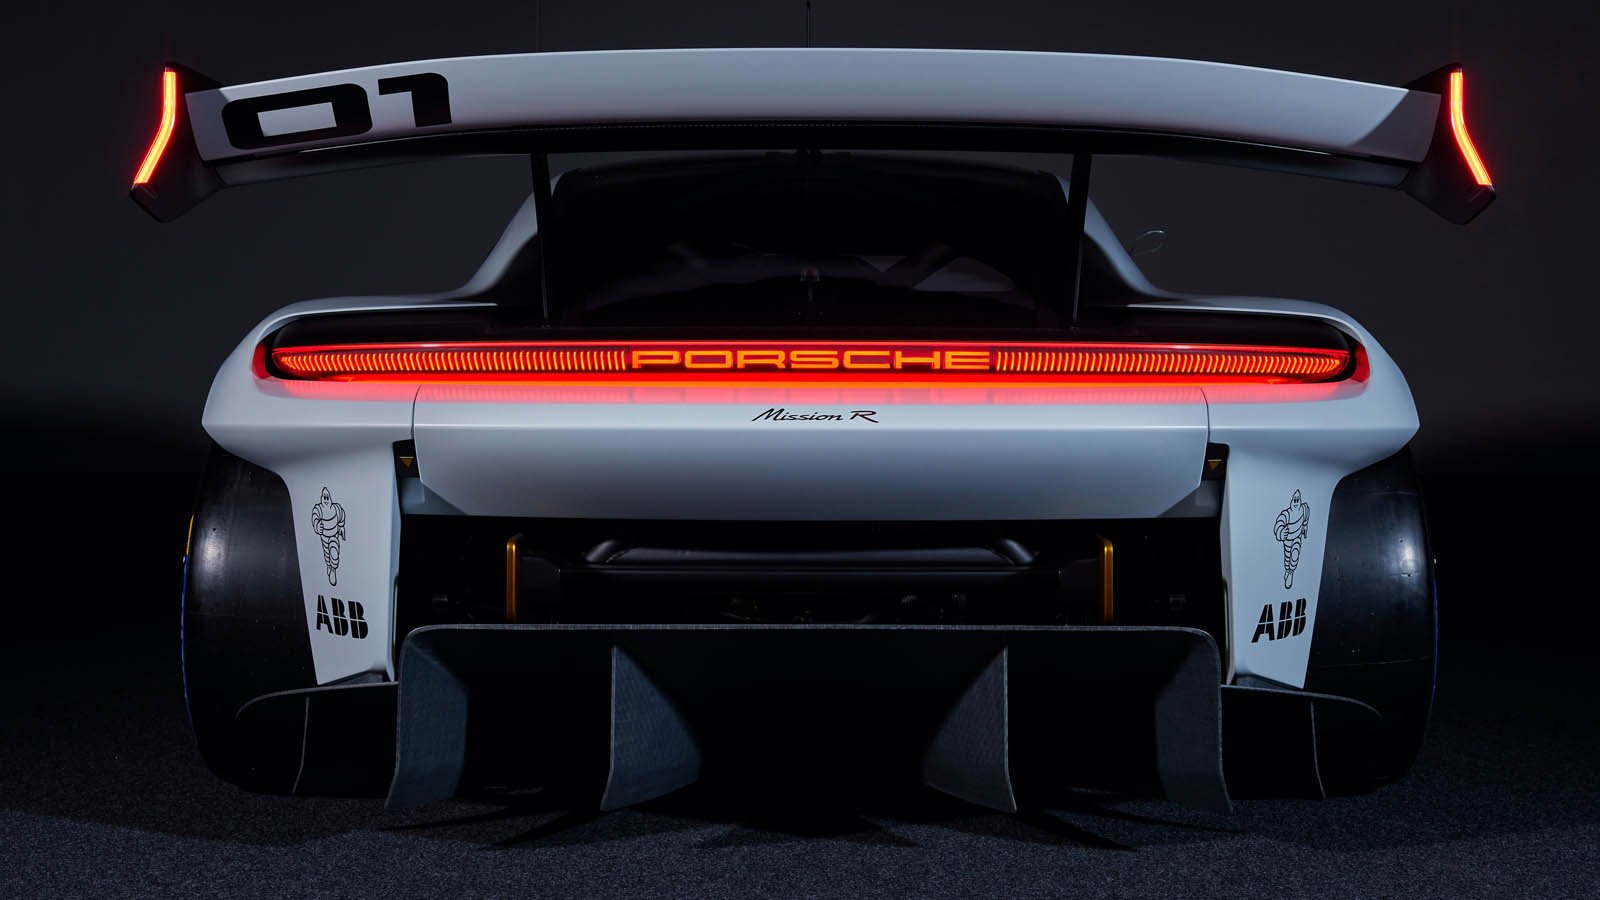 Porsche Mission R Concept Rear in the Dark with Lights On